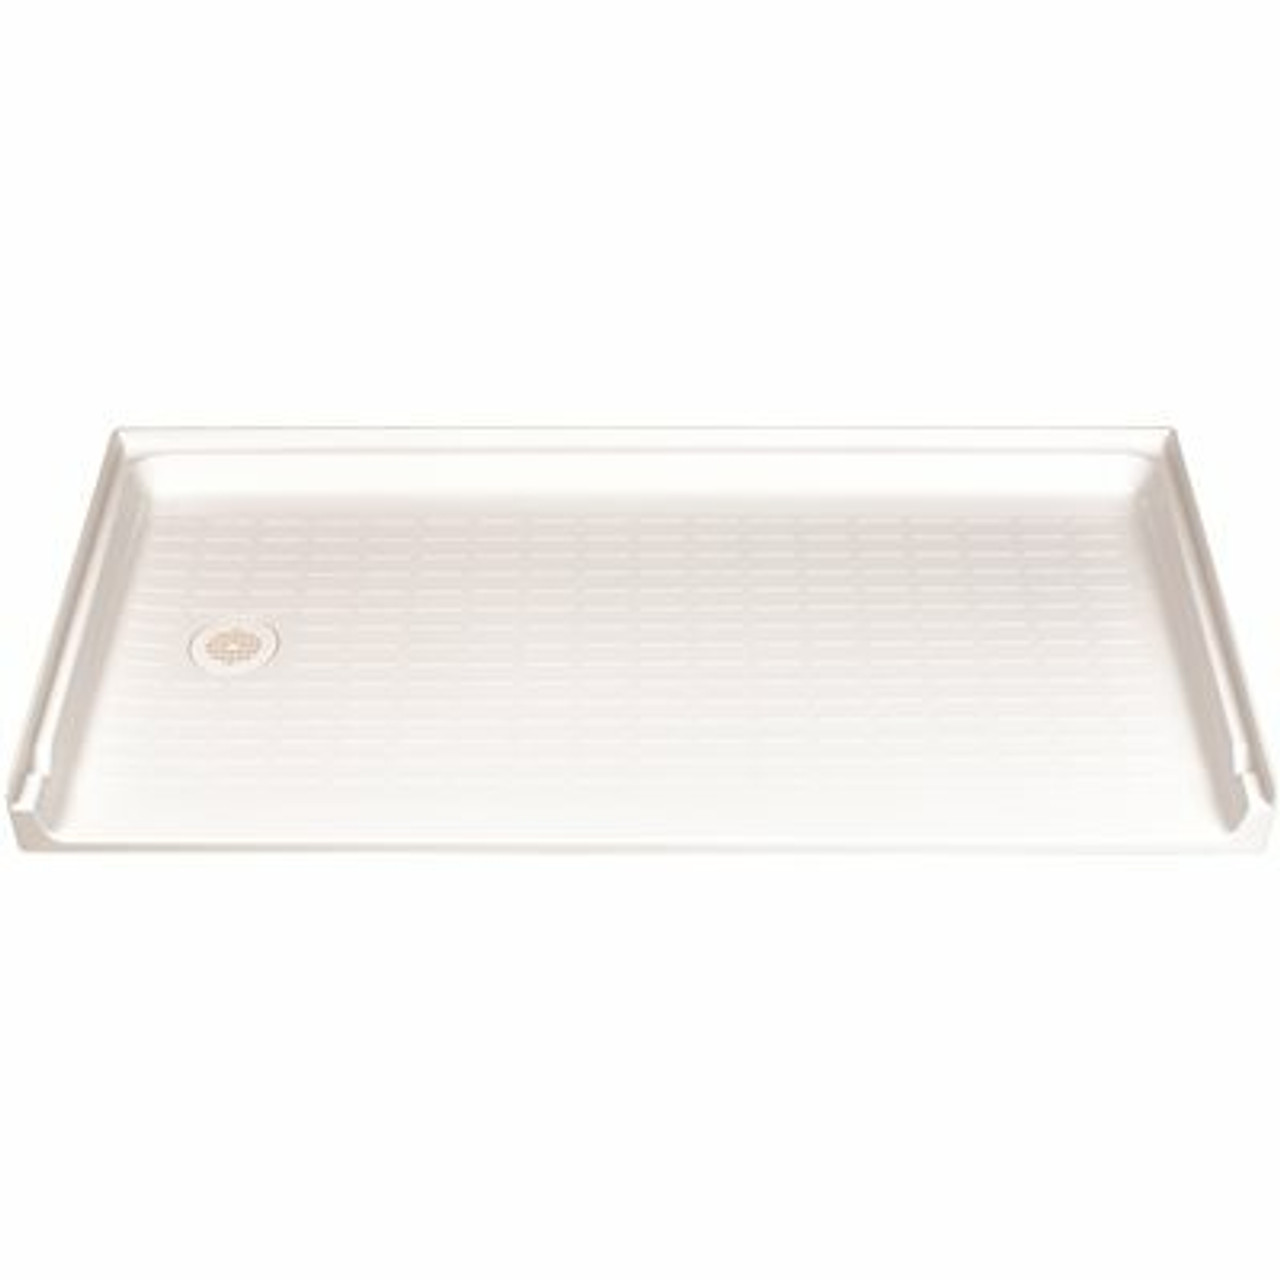 Mustee Caregiver 30 In. X 60 In. Single Threshold Shower Floor In White - 3557889